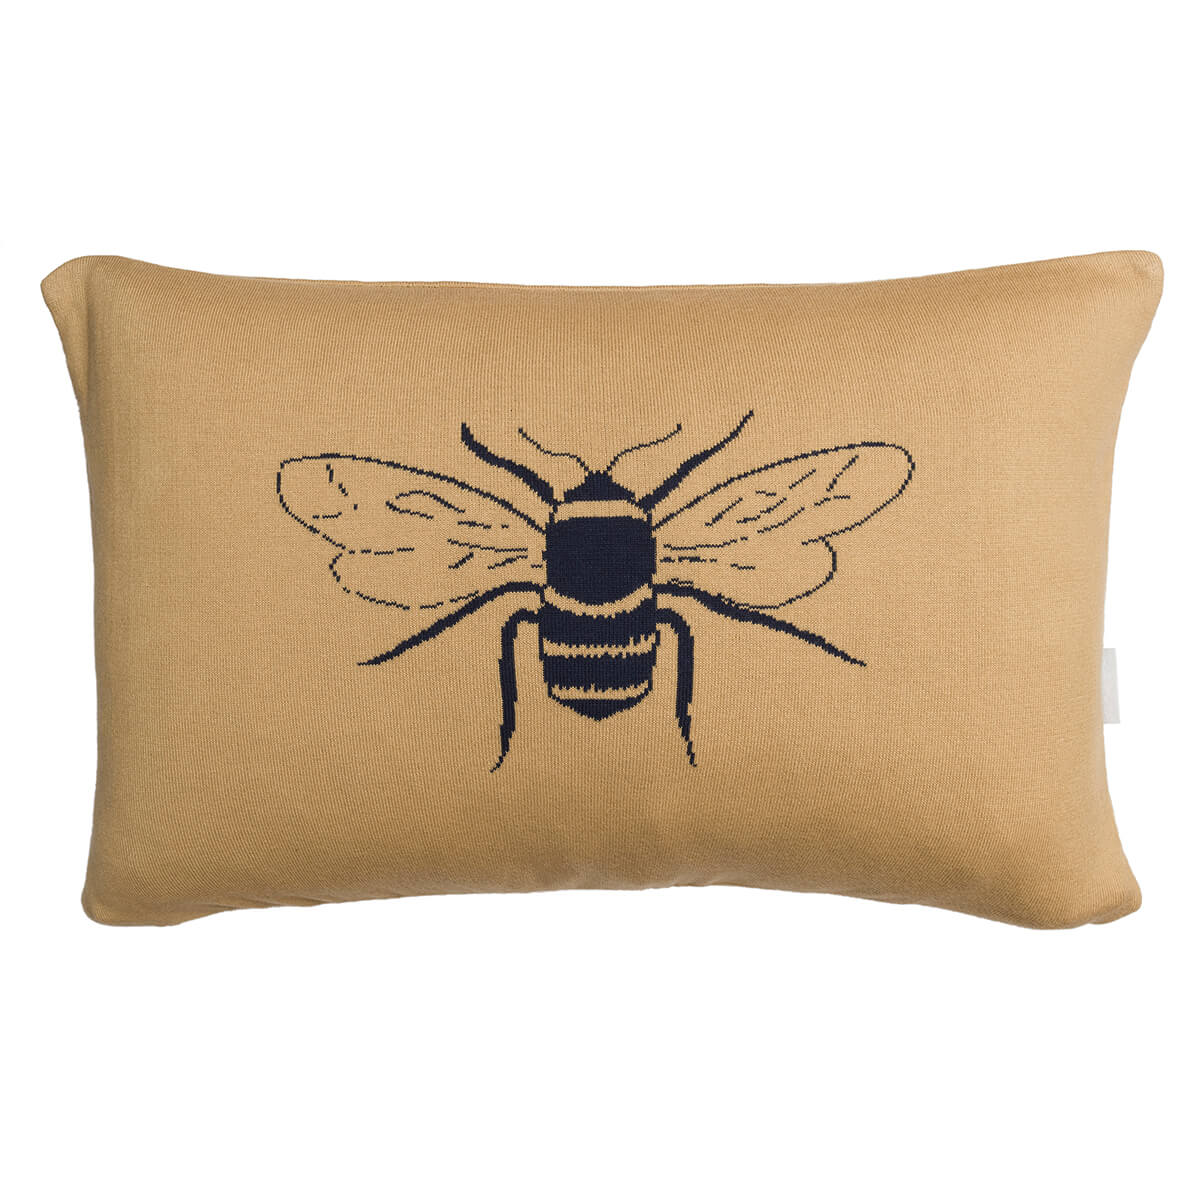 Bees Knitted Statement Cushion